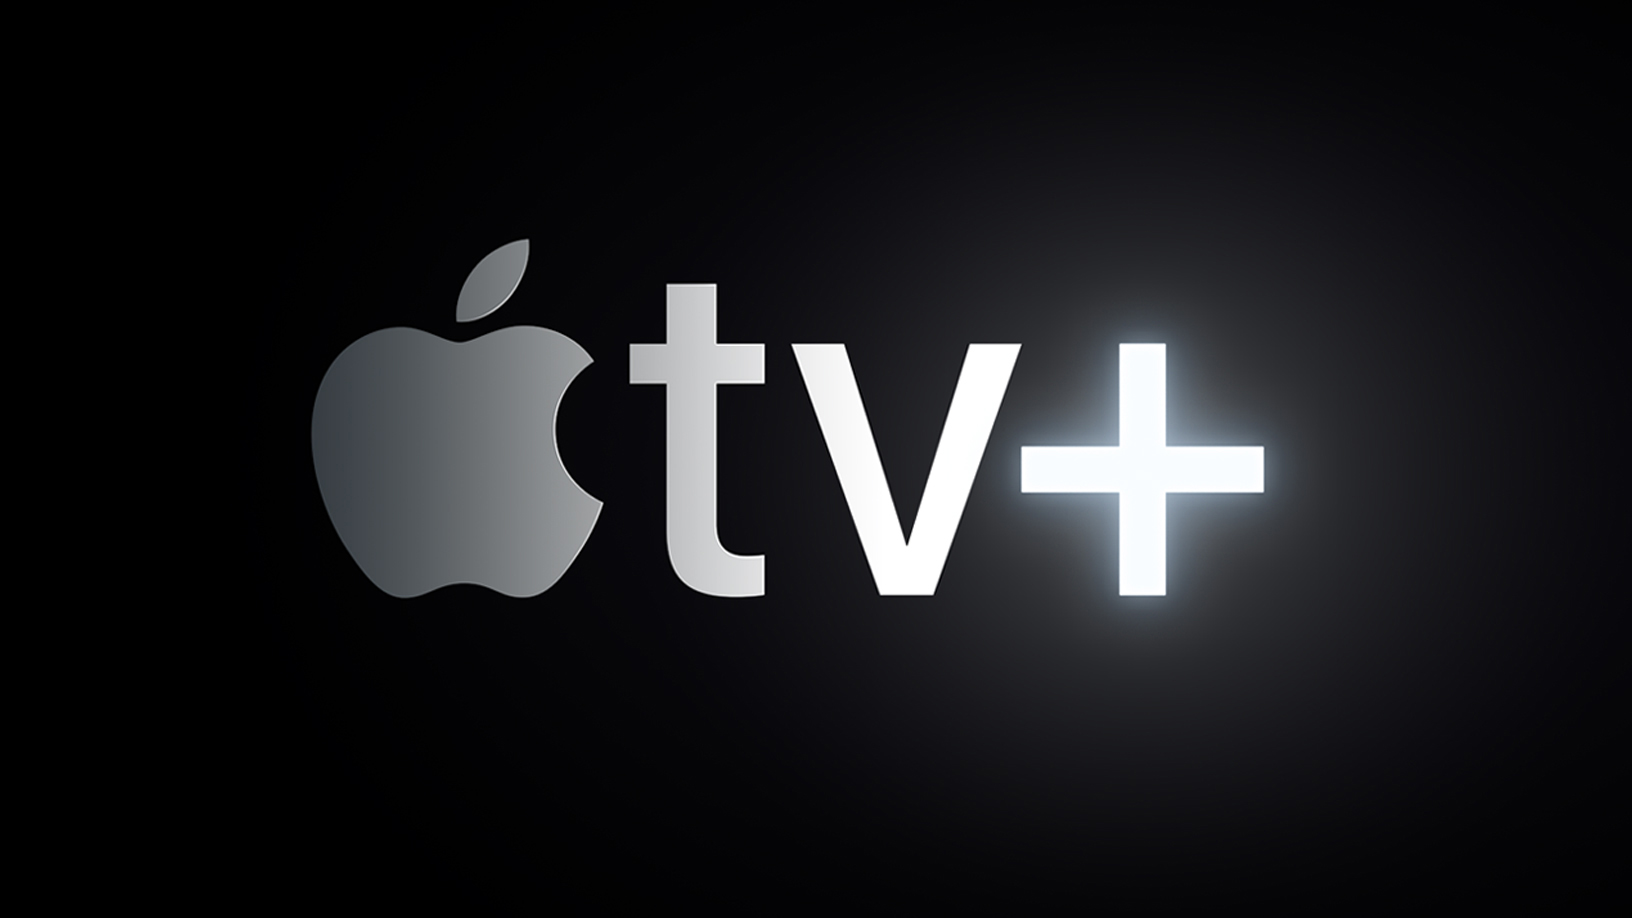 Apple might bid on NBA streaming rights for Apple TV Plus